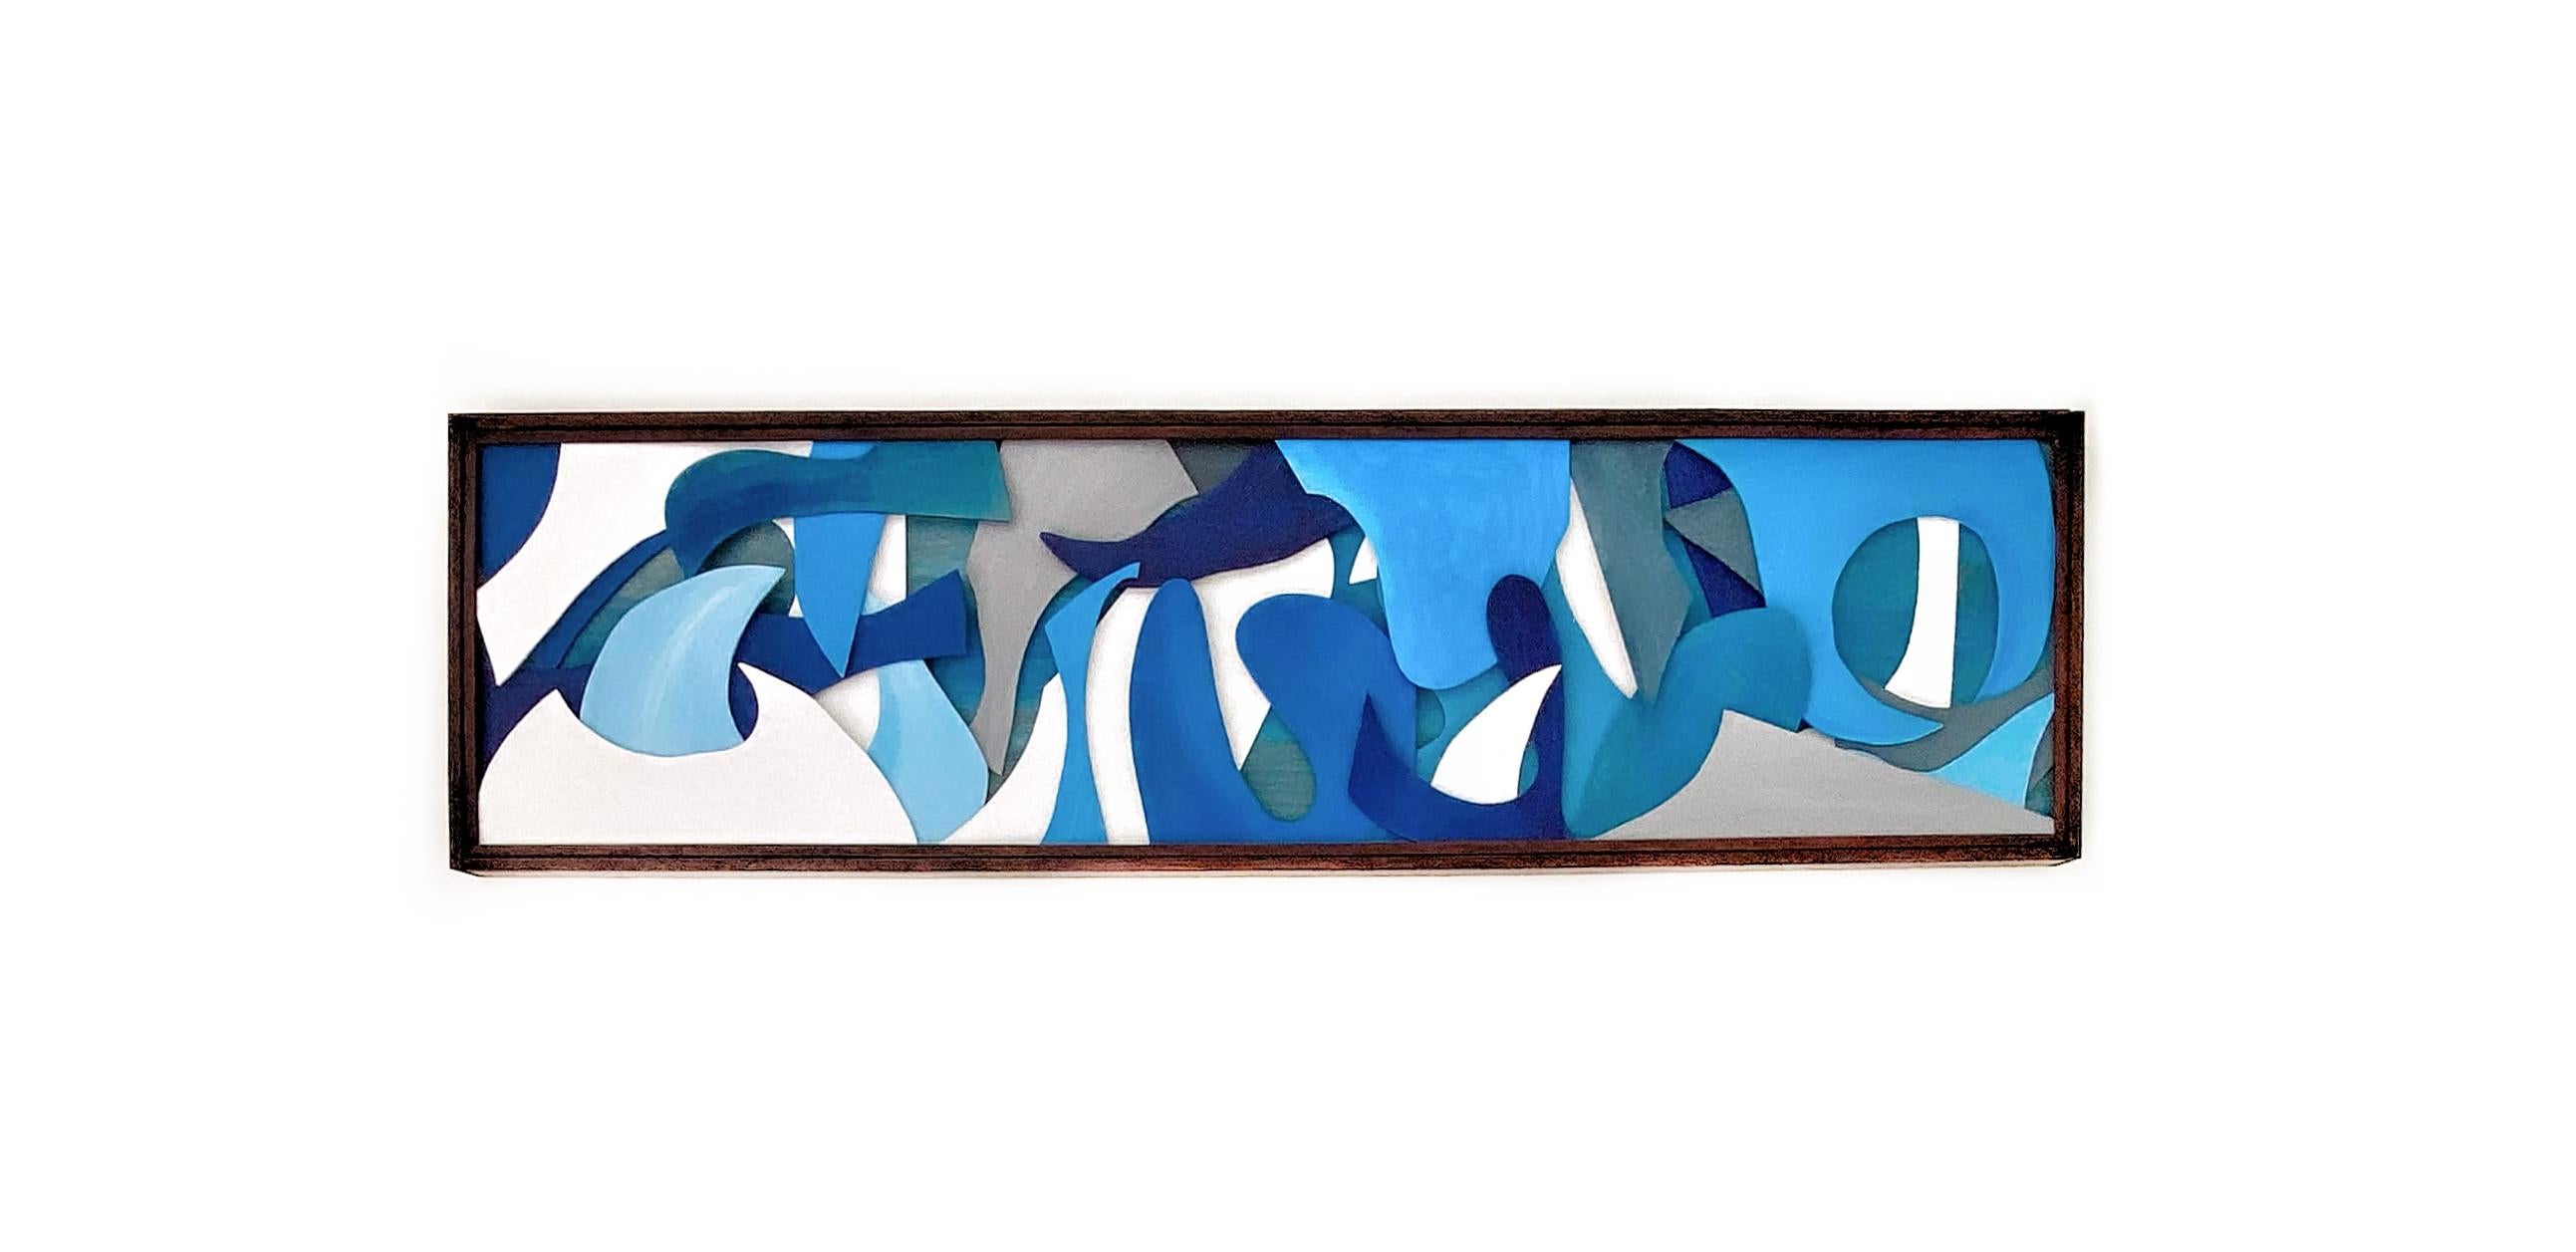 GS01, Contemporary Geometric Abstraction 3D Wall Sculpture 8